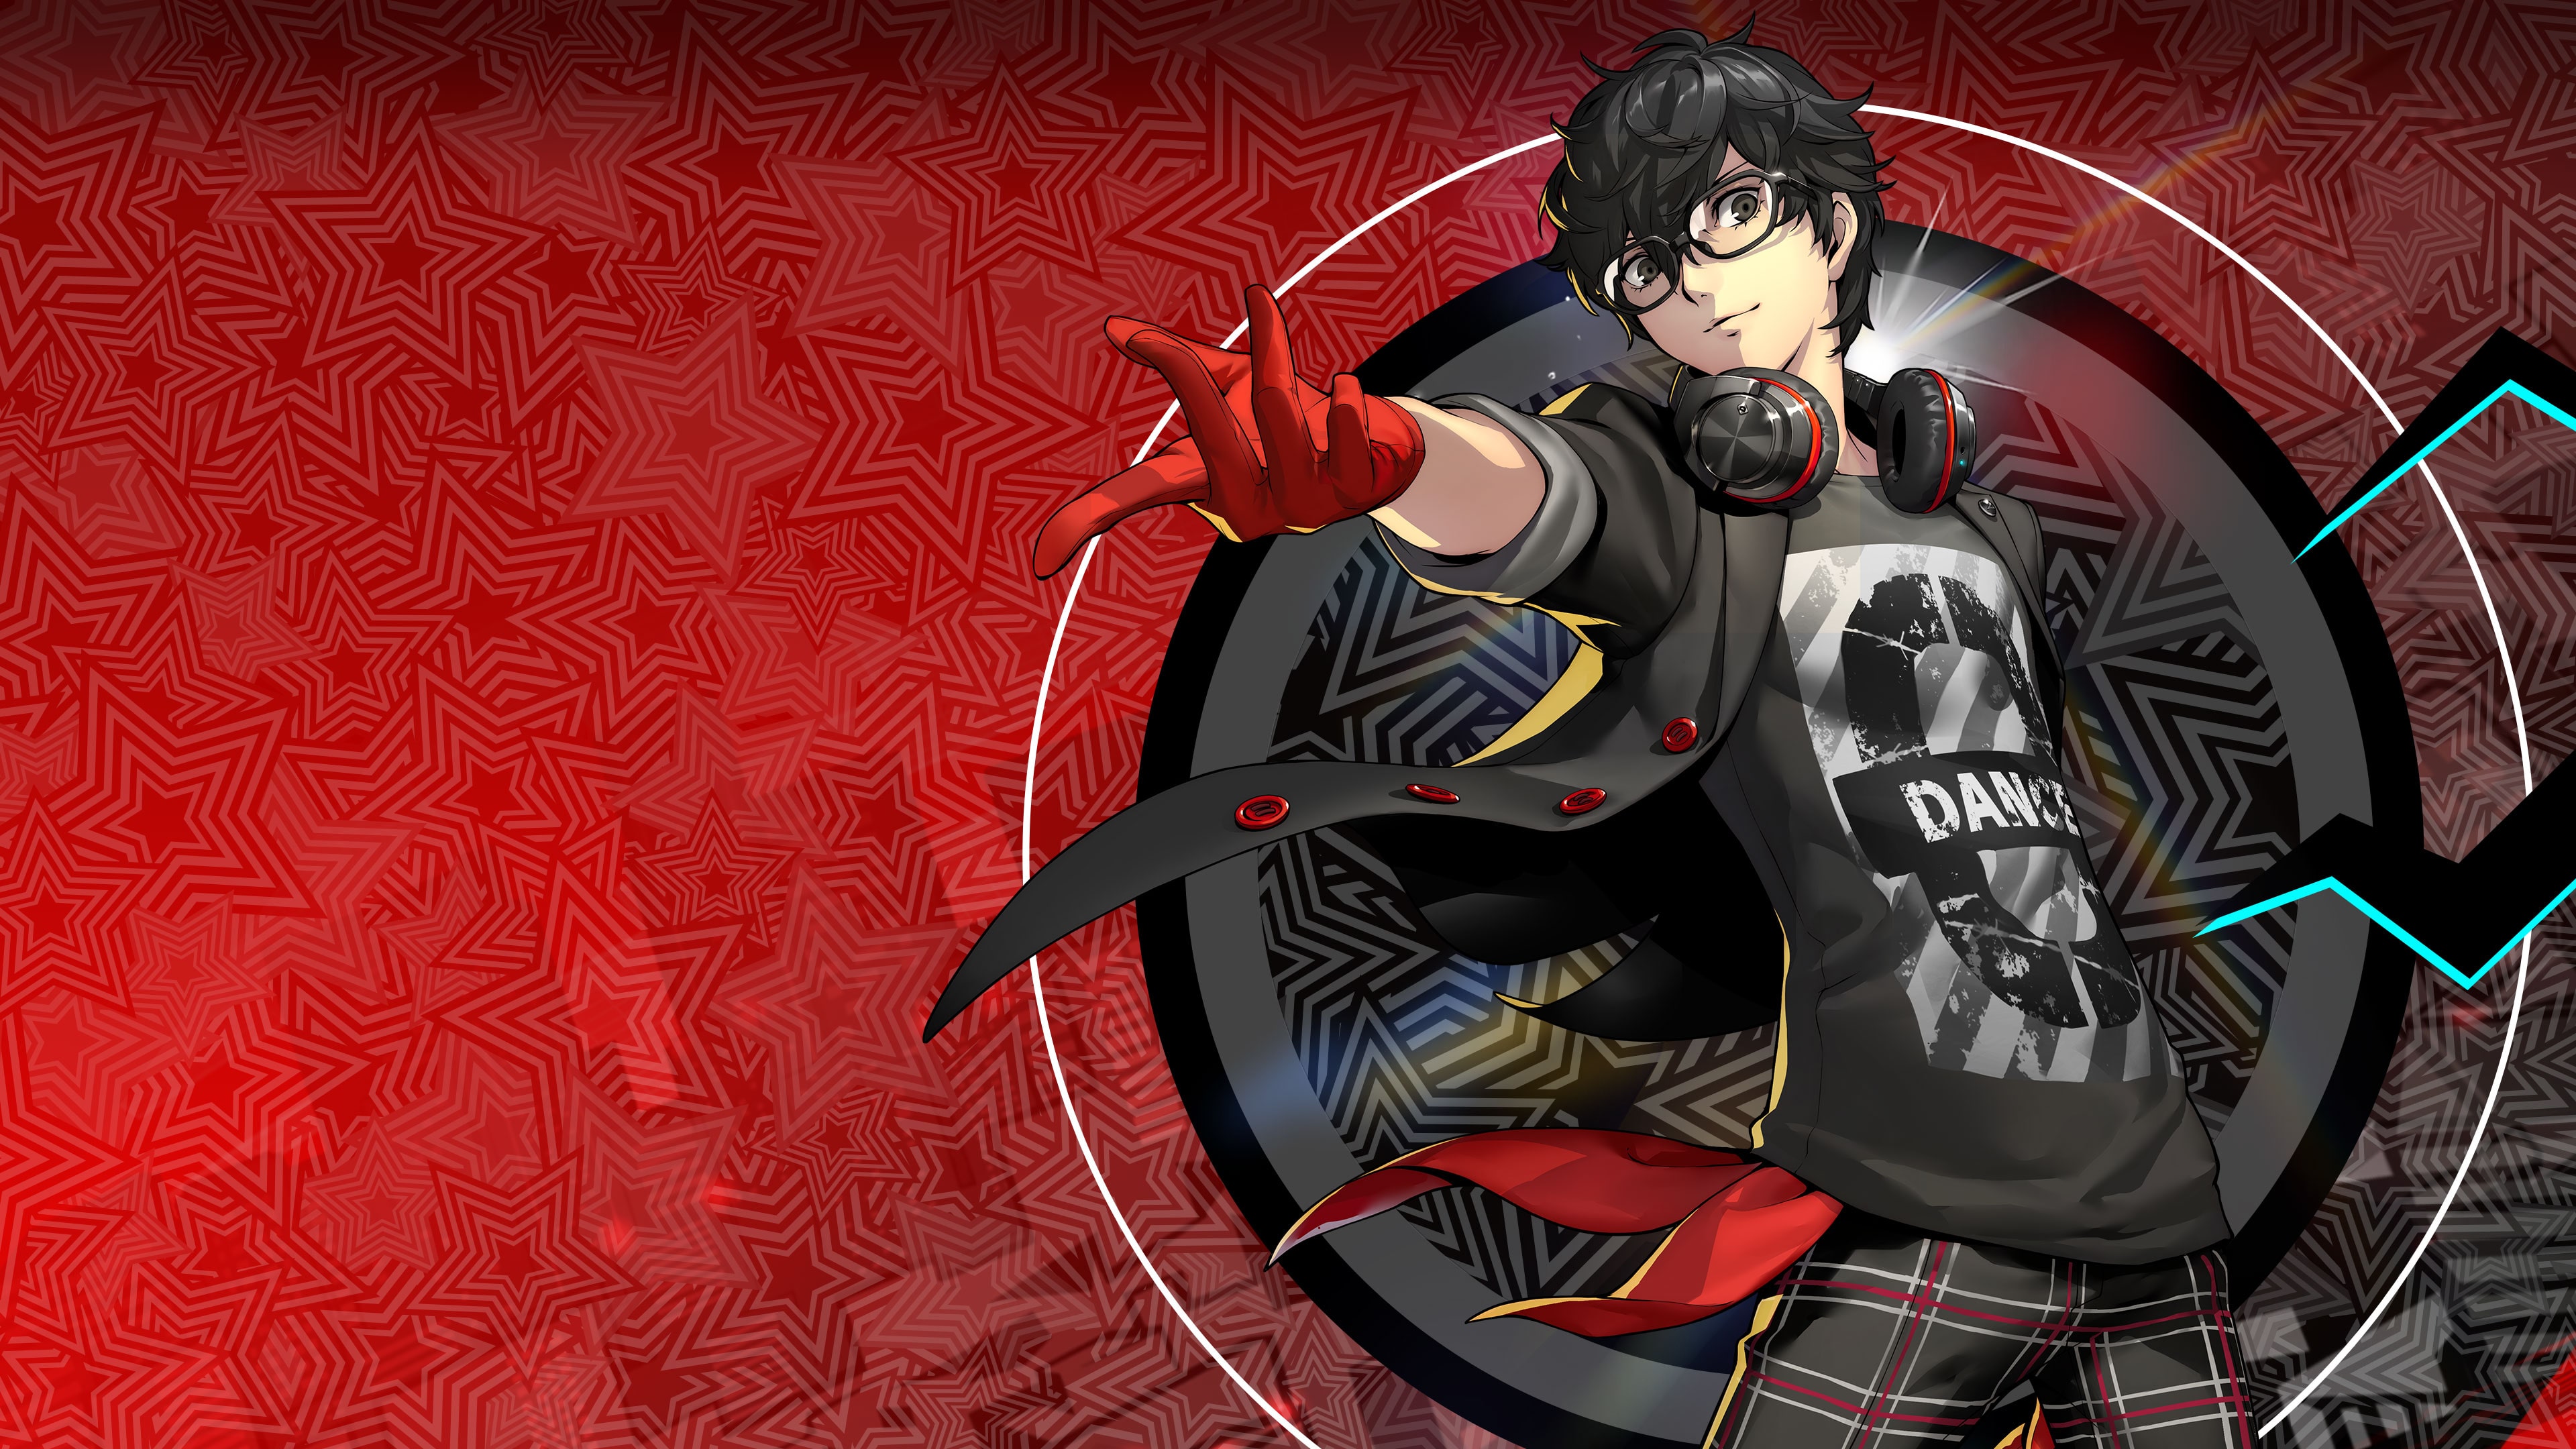 My Persona 5 characters template! : r/Persona5